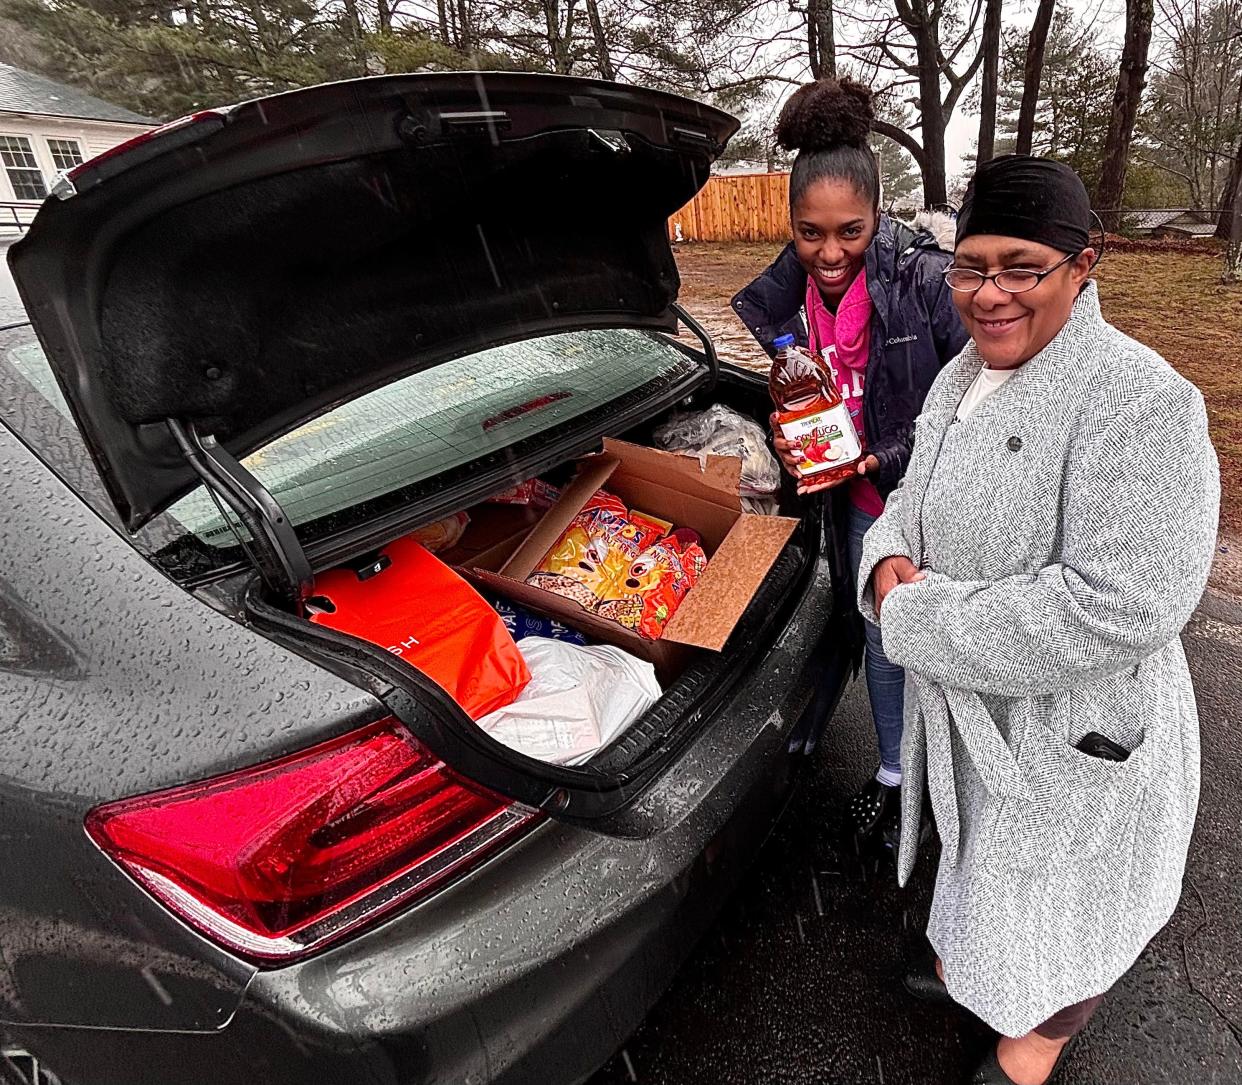 Saozenha Alves of Brockton, left, seen here with her aunt, visited the food pantry at North Baptist Church in Taunton on Saturday, March 23.